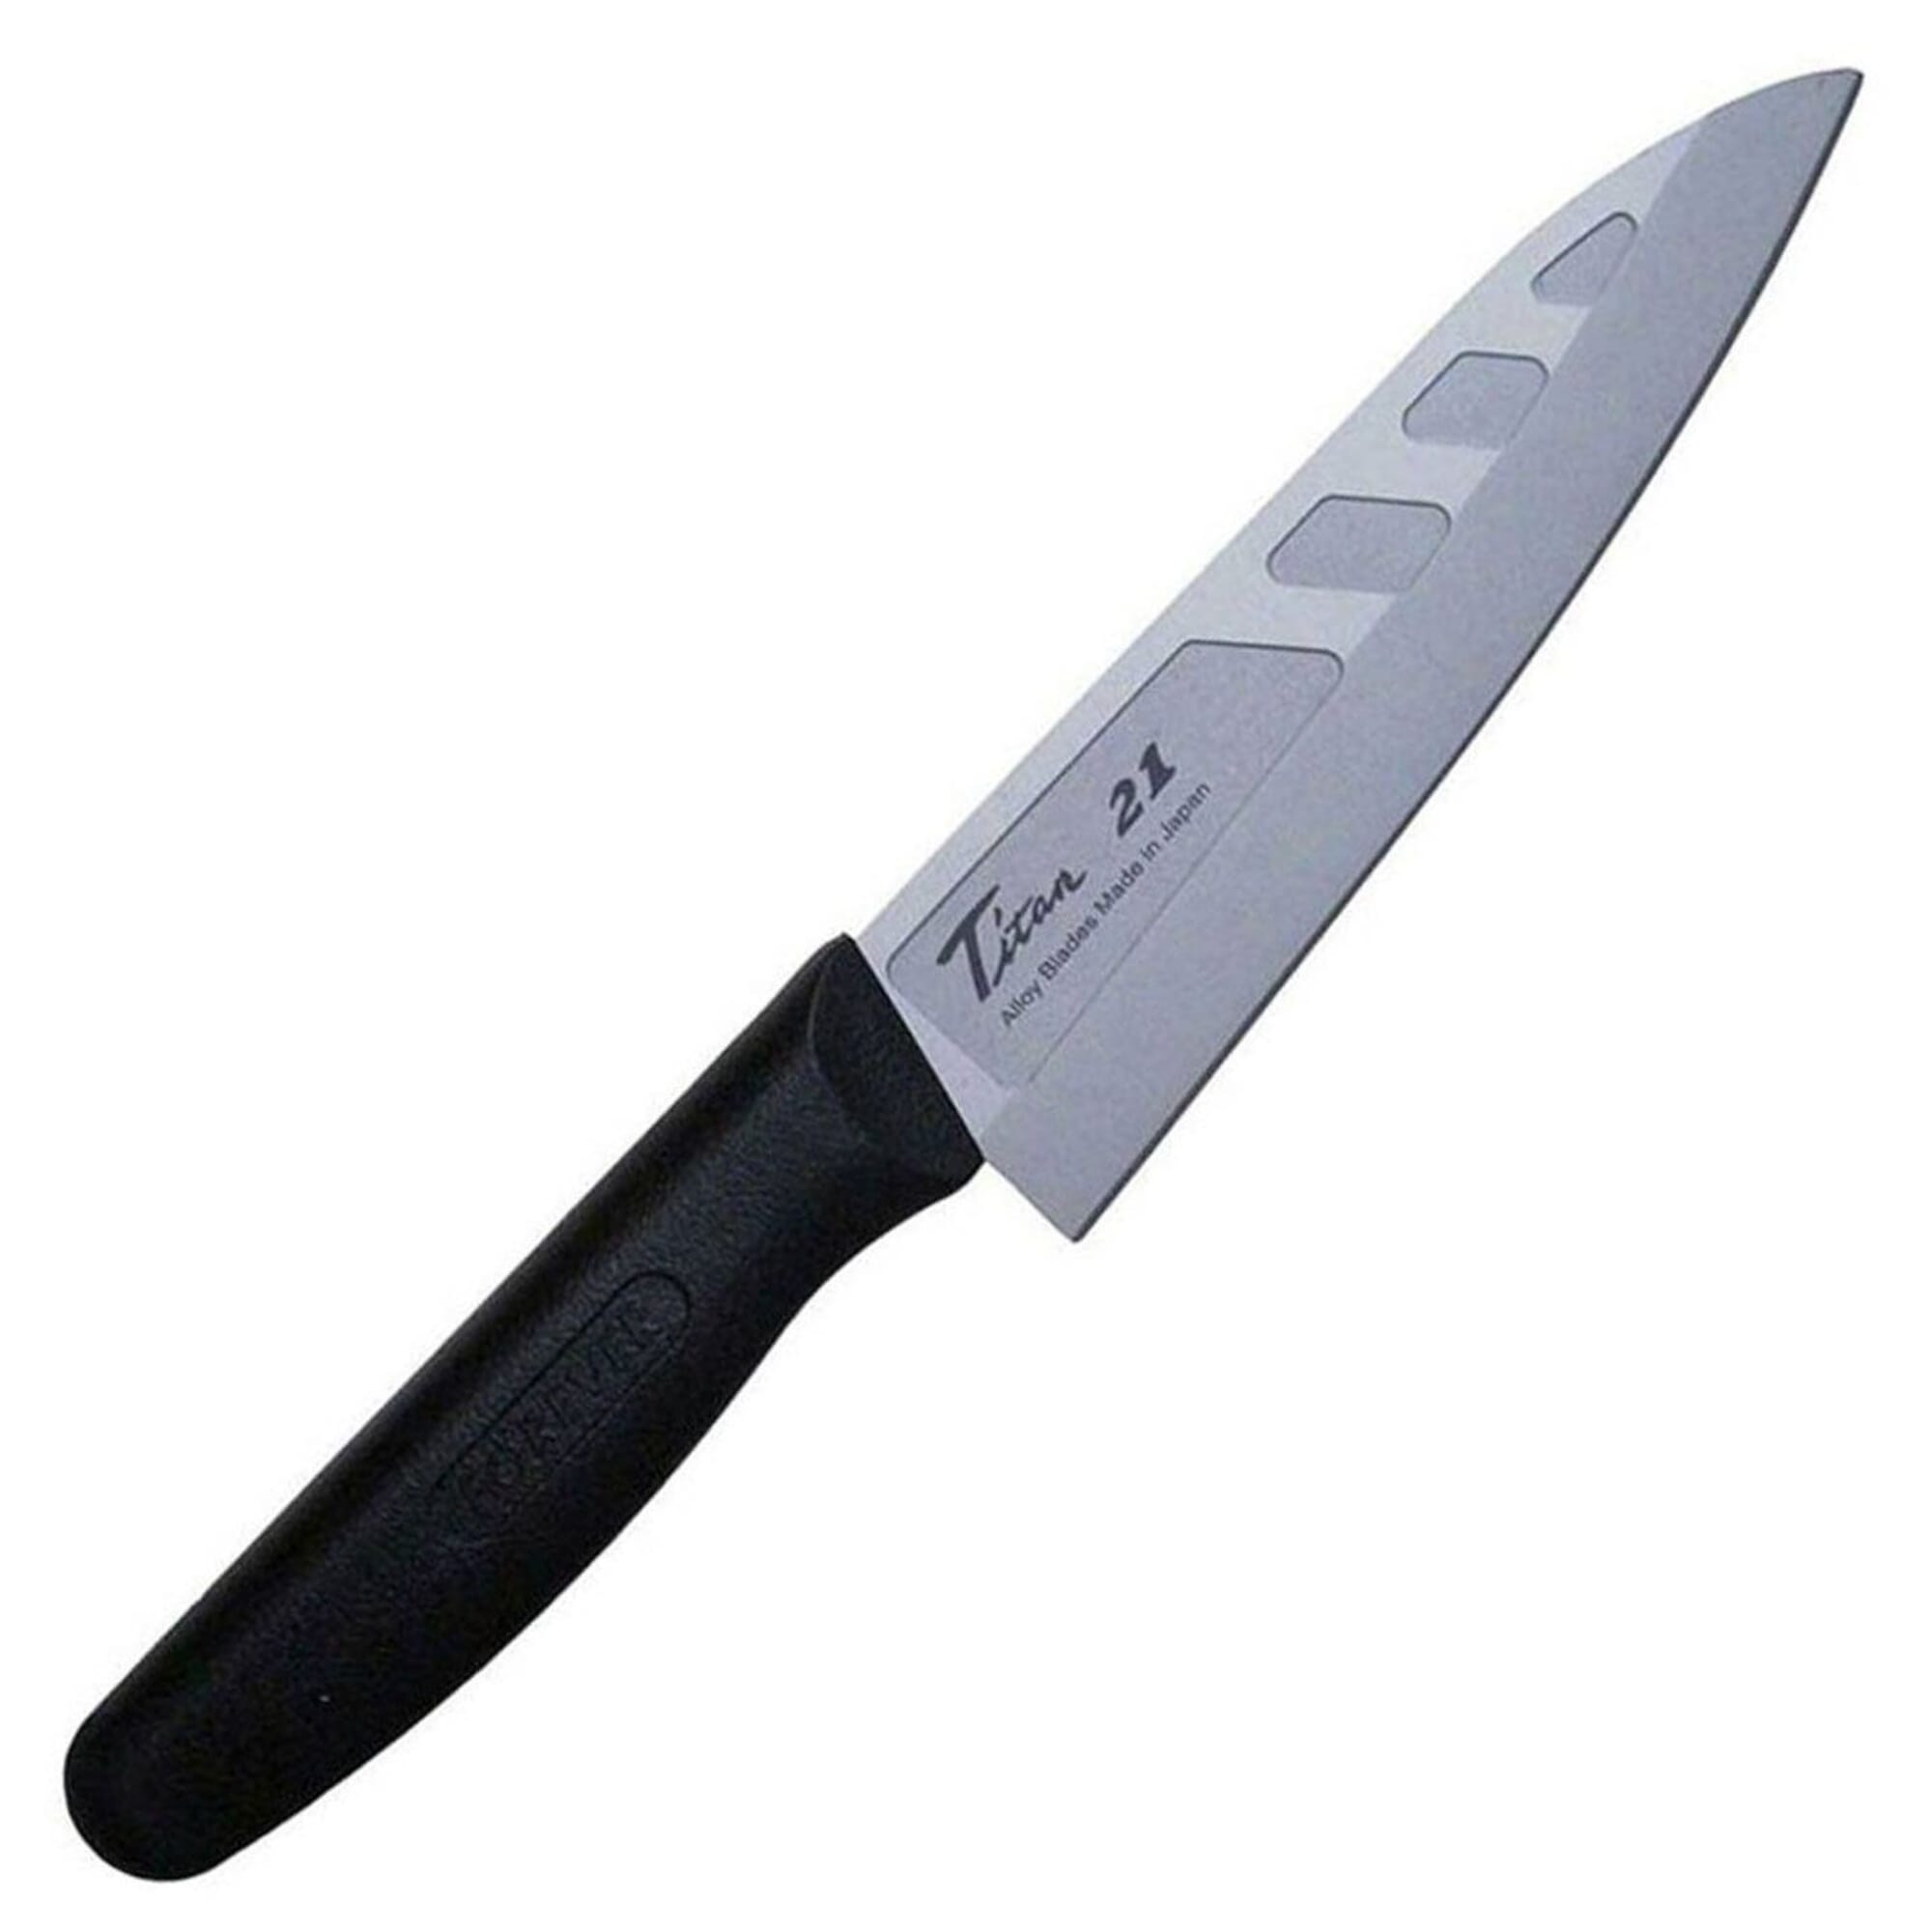 Forever Cera CHT16 Titan 21 Titanium Hybrid Deluxe Quality General Purpose Kitchen Knife, with Plastic Handle, for Cutting & Slicing